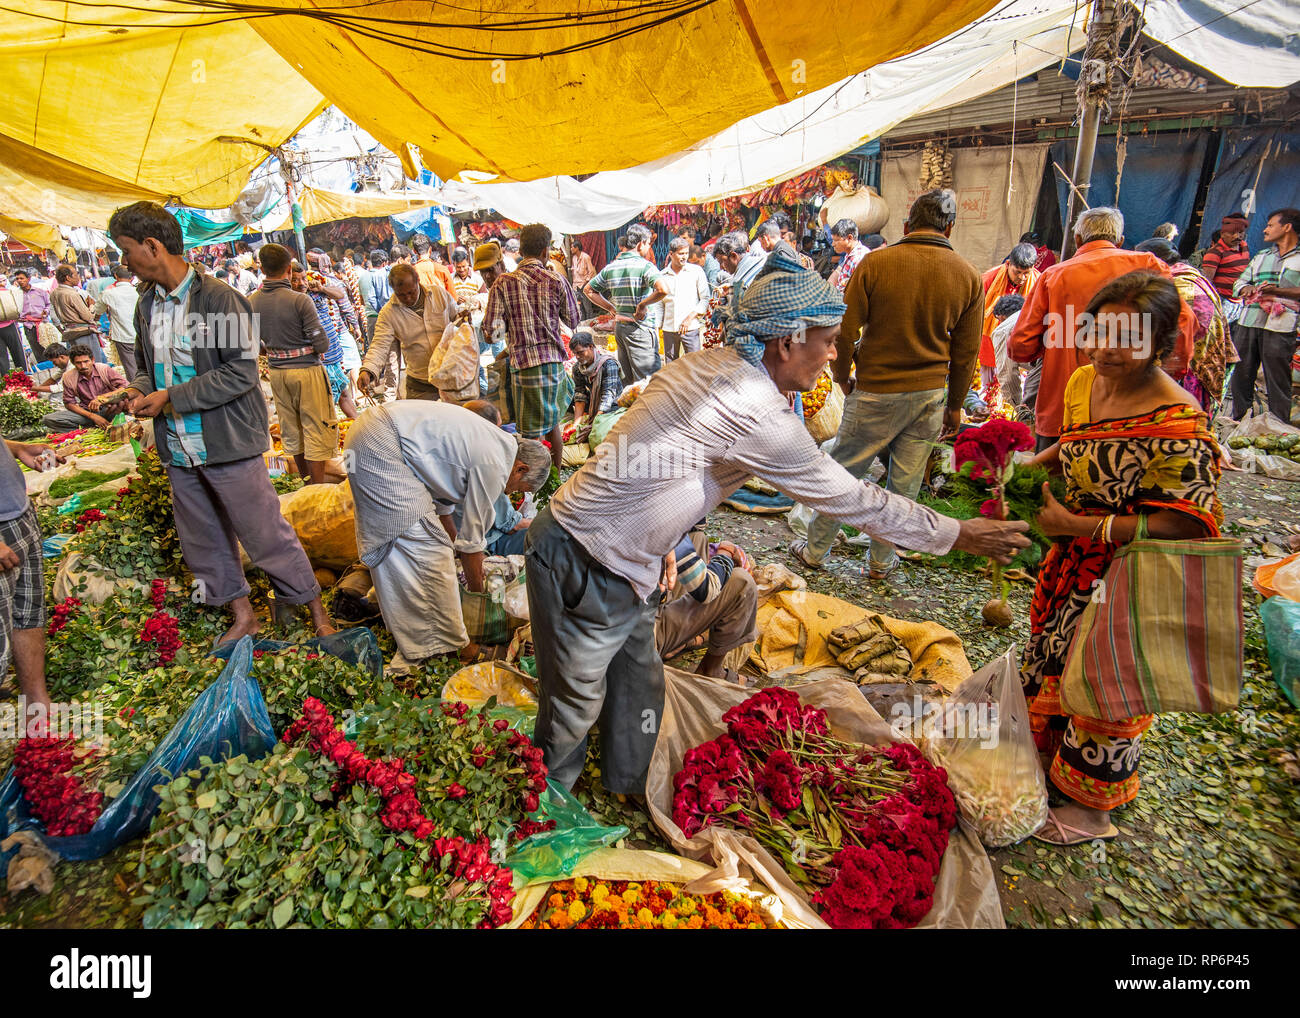 Crowds of local people sellers and buyers showing the hustle and bustle of the Mullick Ghat Flower Market. Stock Photo